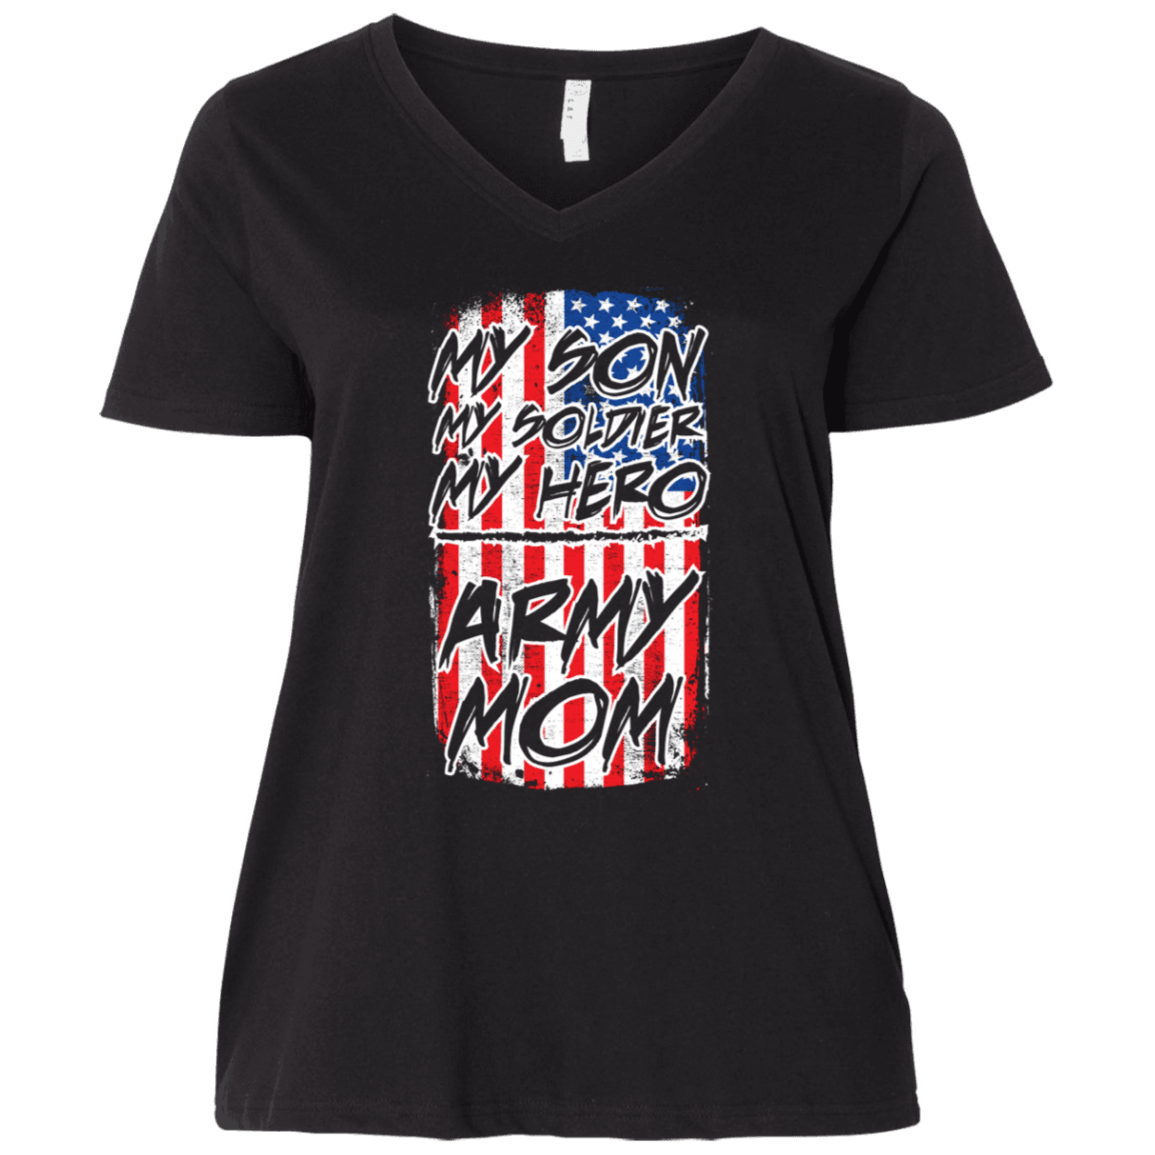 Designs by MyUtopia Shout Out:My Son My Soldier My Hero Army Mom Ladies' Curvy V-Neck Plus Size T-Shirt,Plus 1X / Black,Ladies T-Shirts